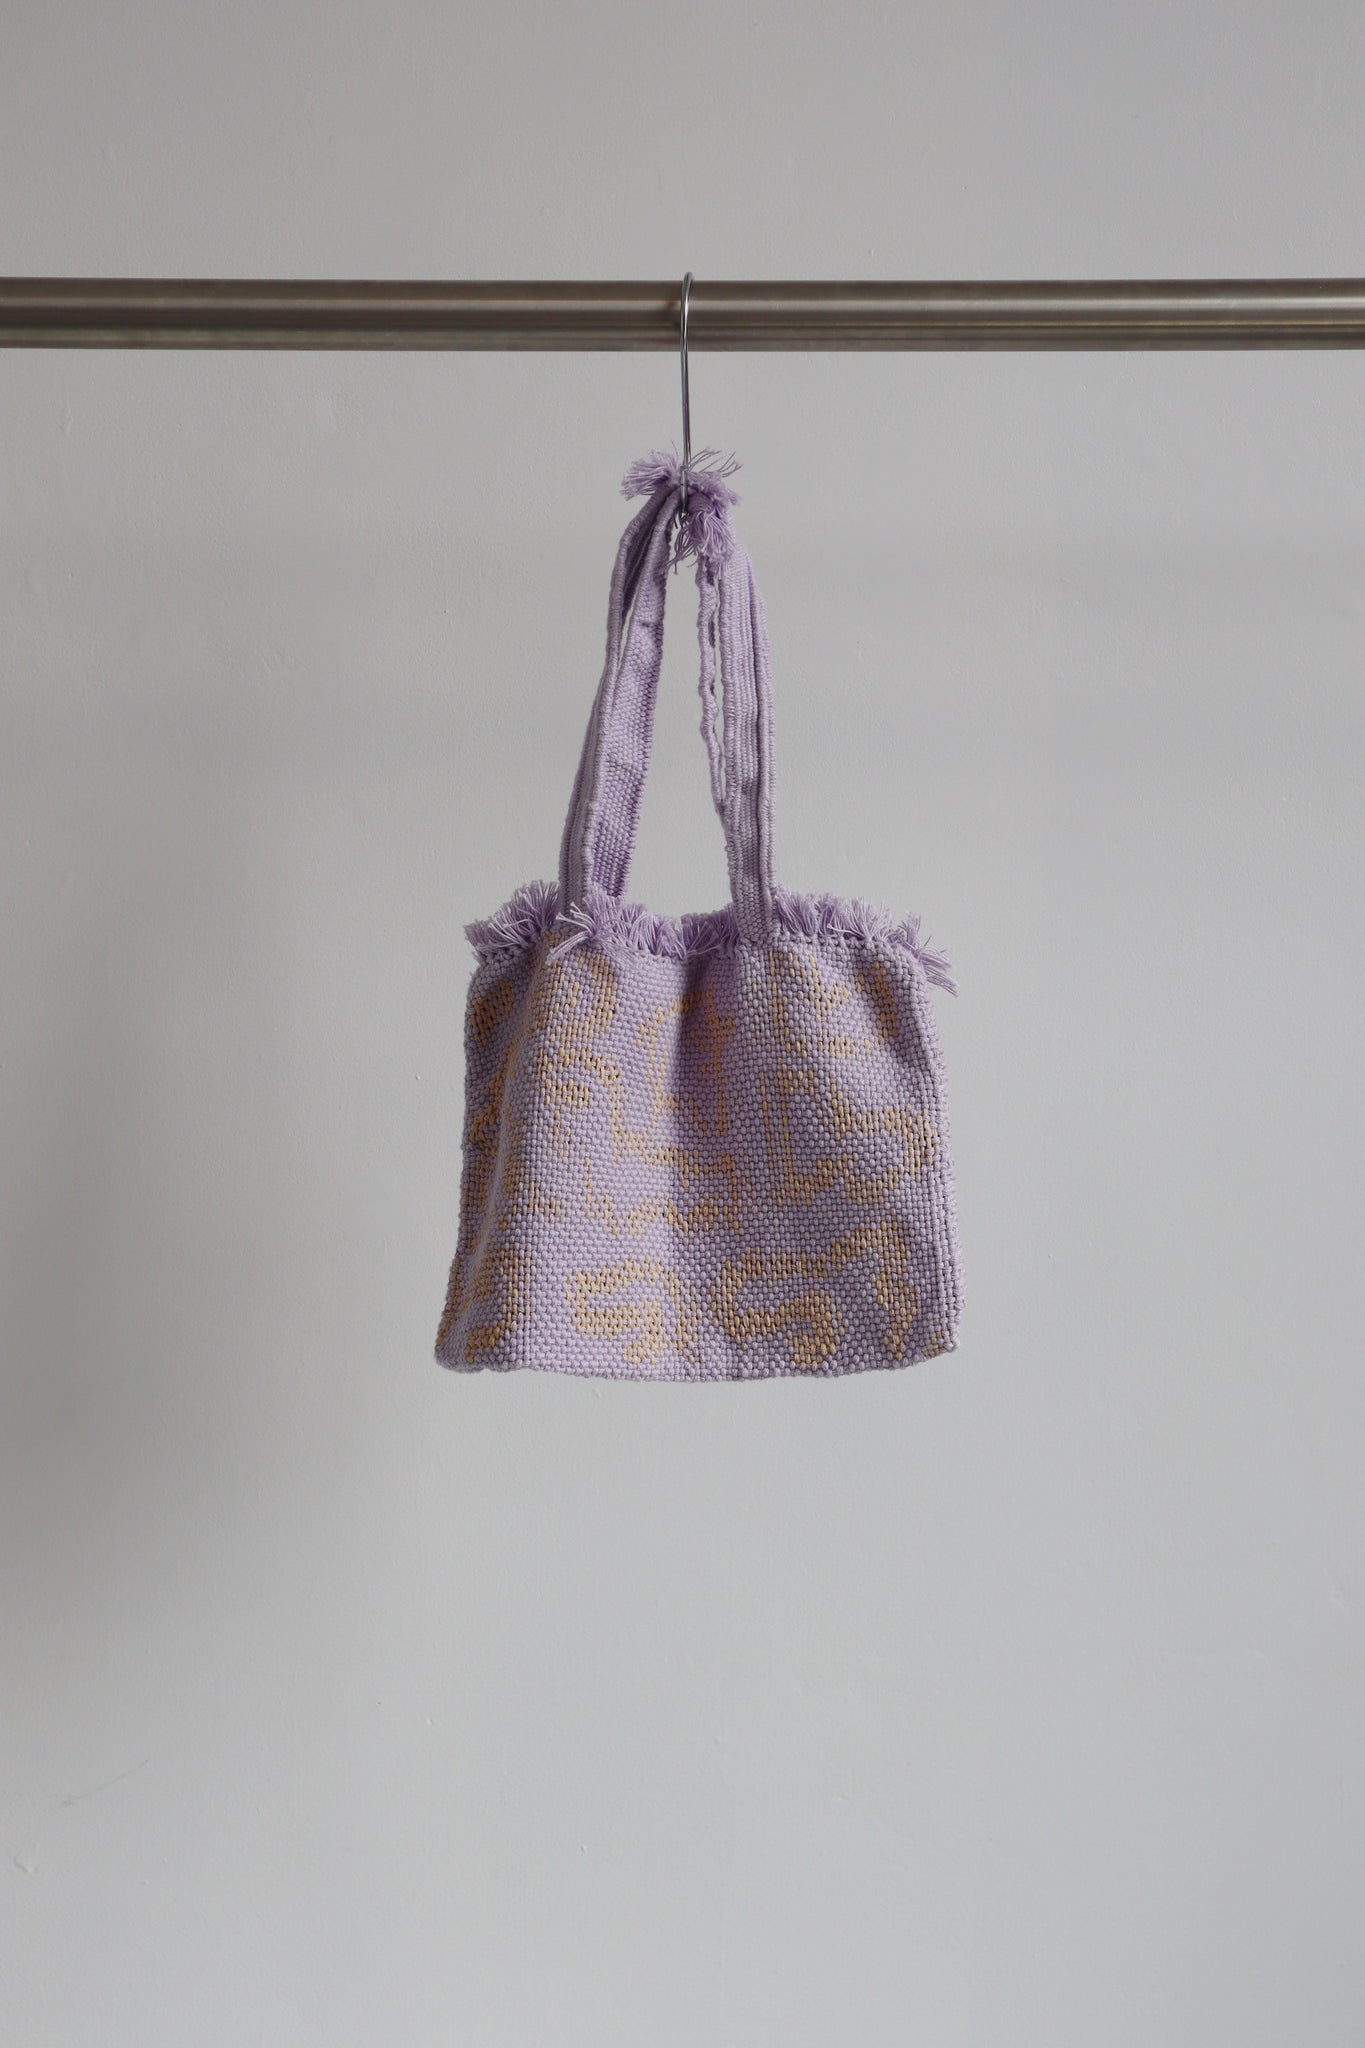 Woven Bag - That Looks